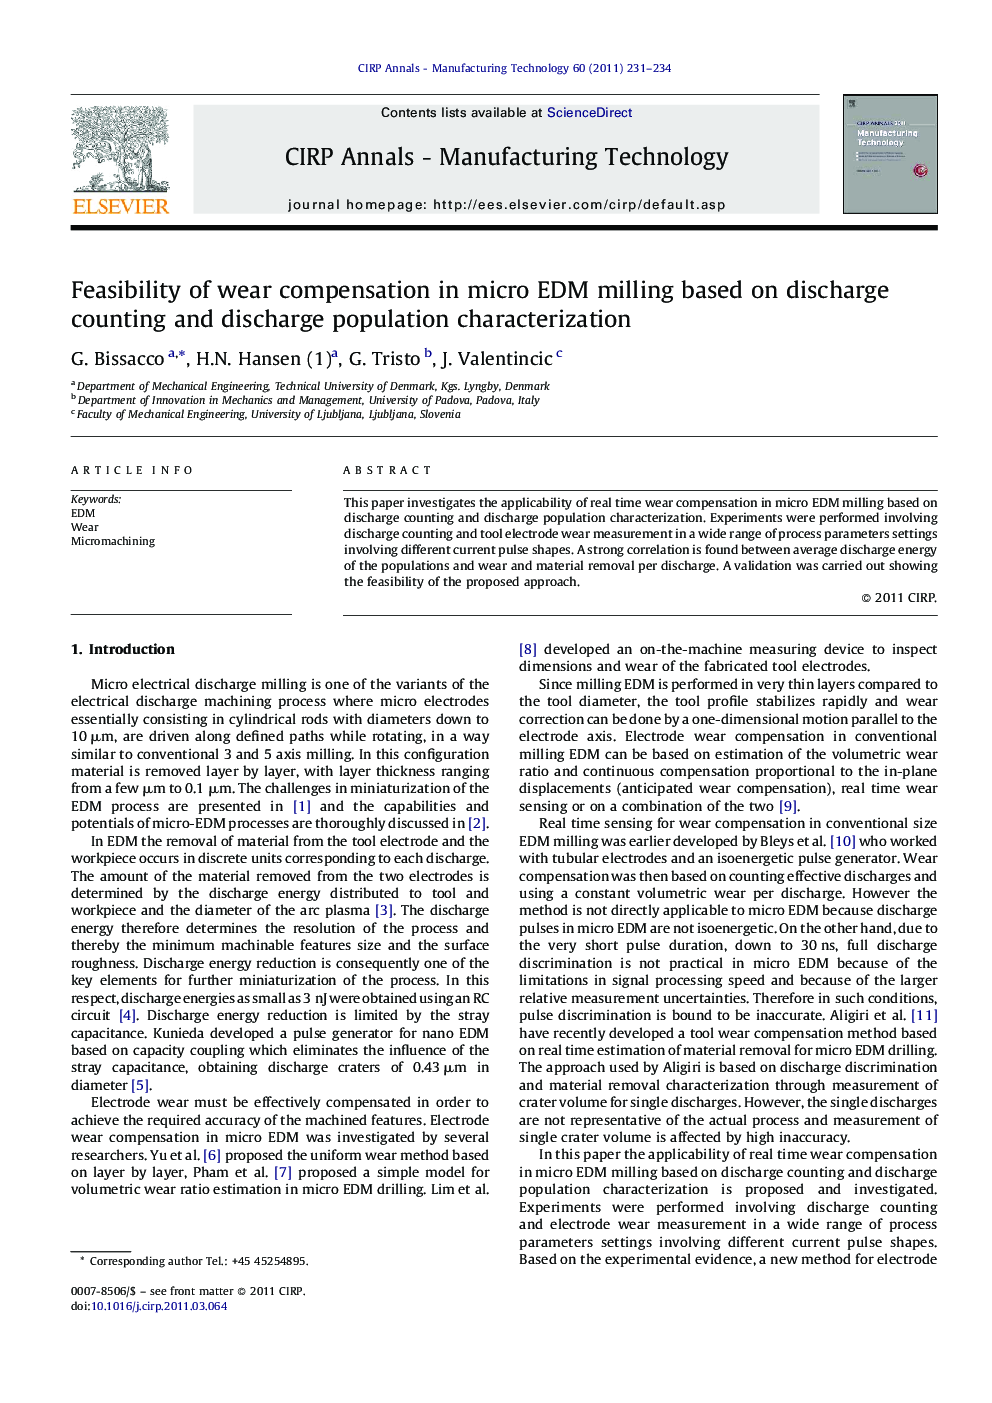 Feasibility of wear compensation in micro EDM milling based on discharge counting and discharge population characterization